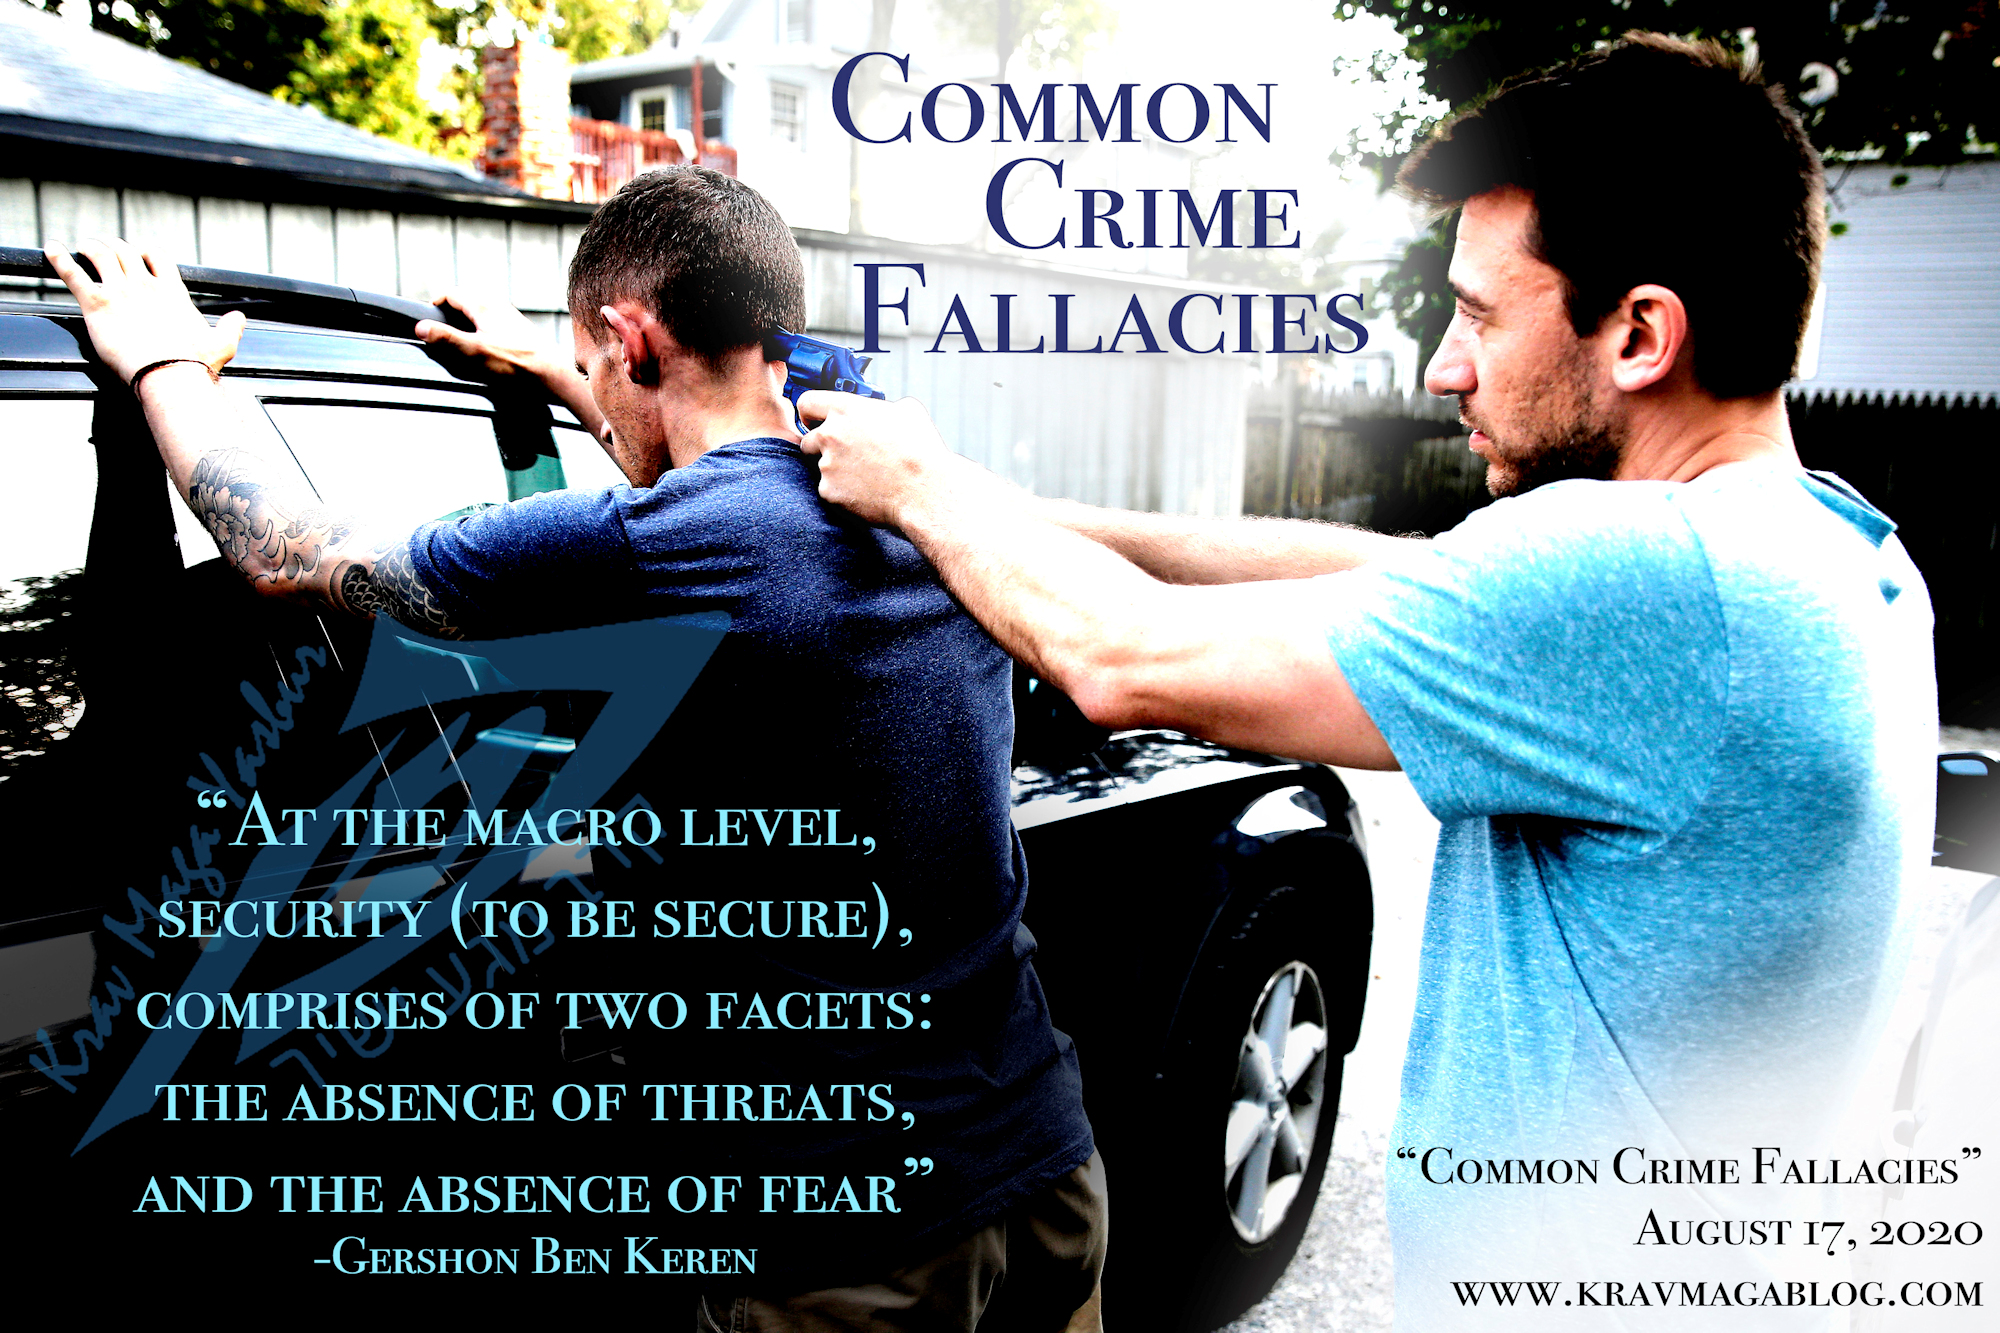 Blog About Common Crime Fallacies